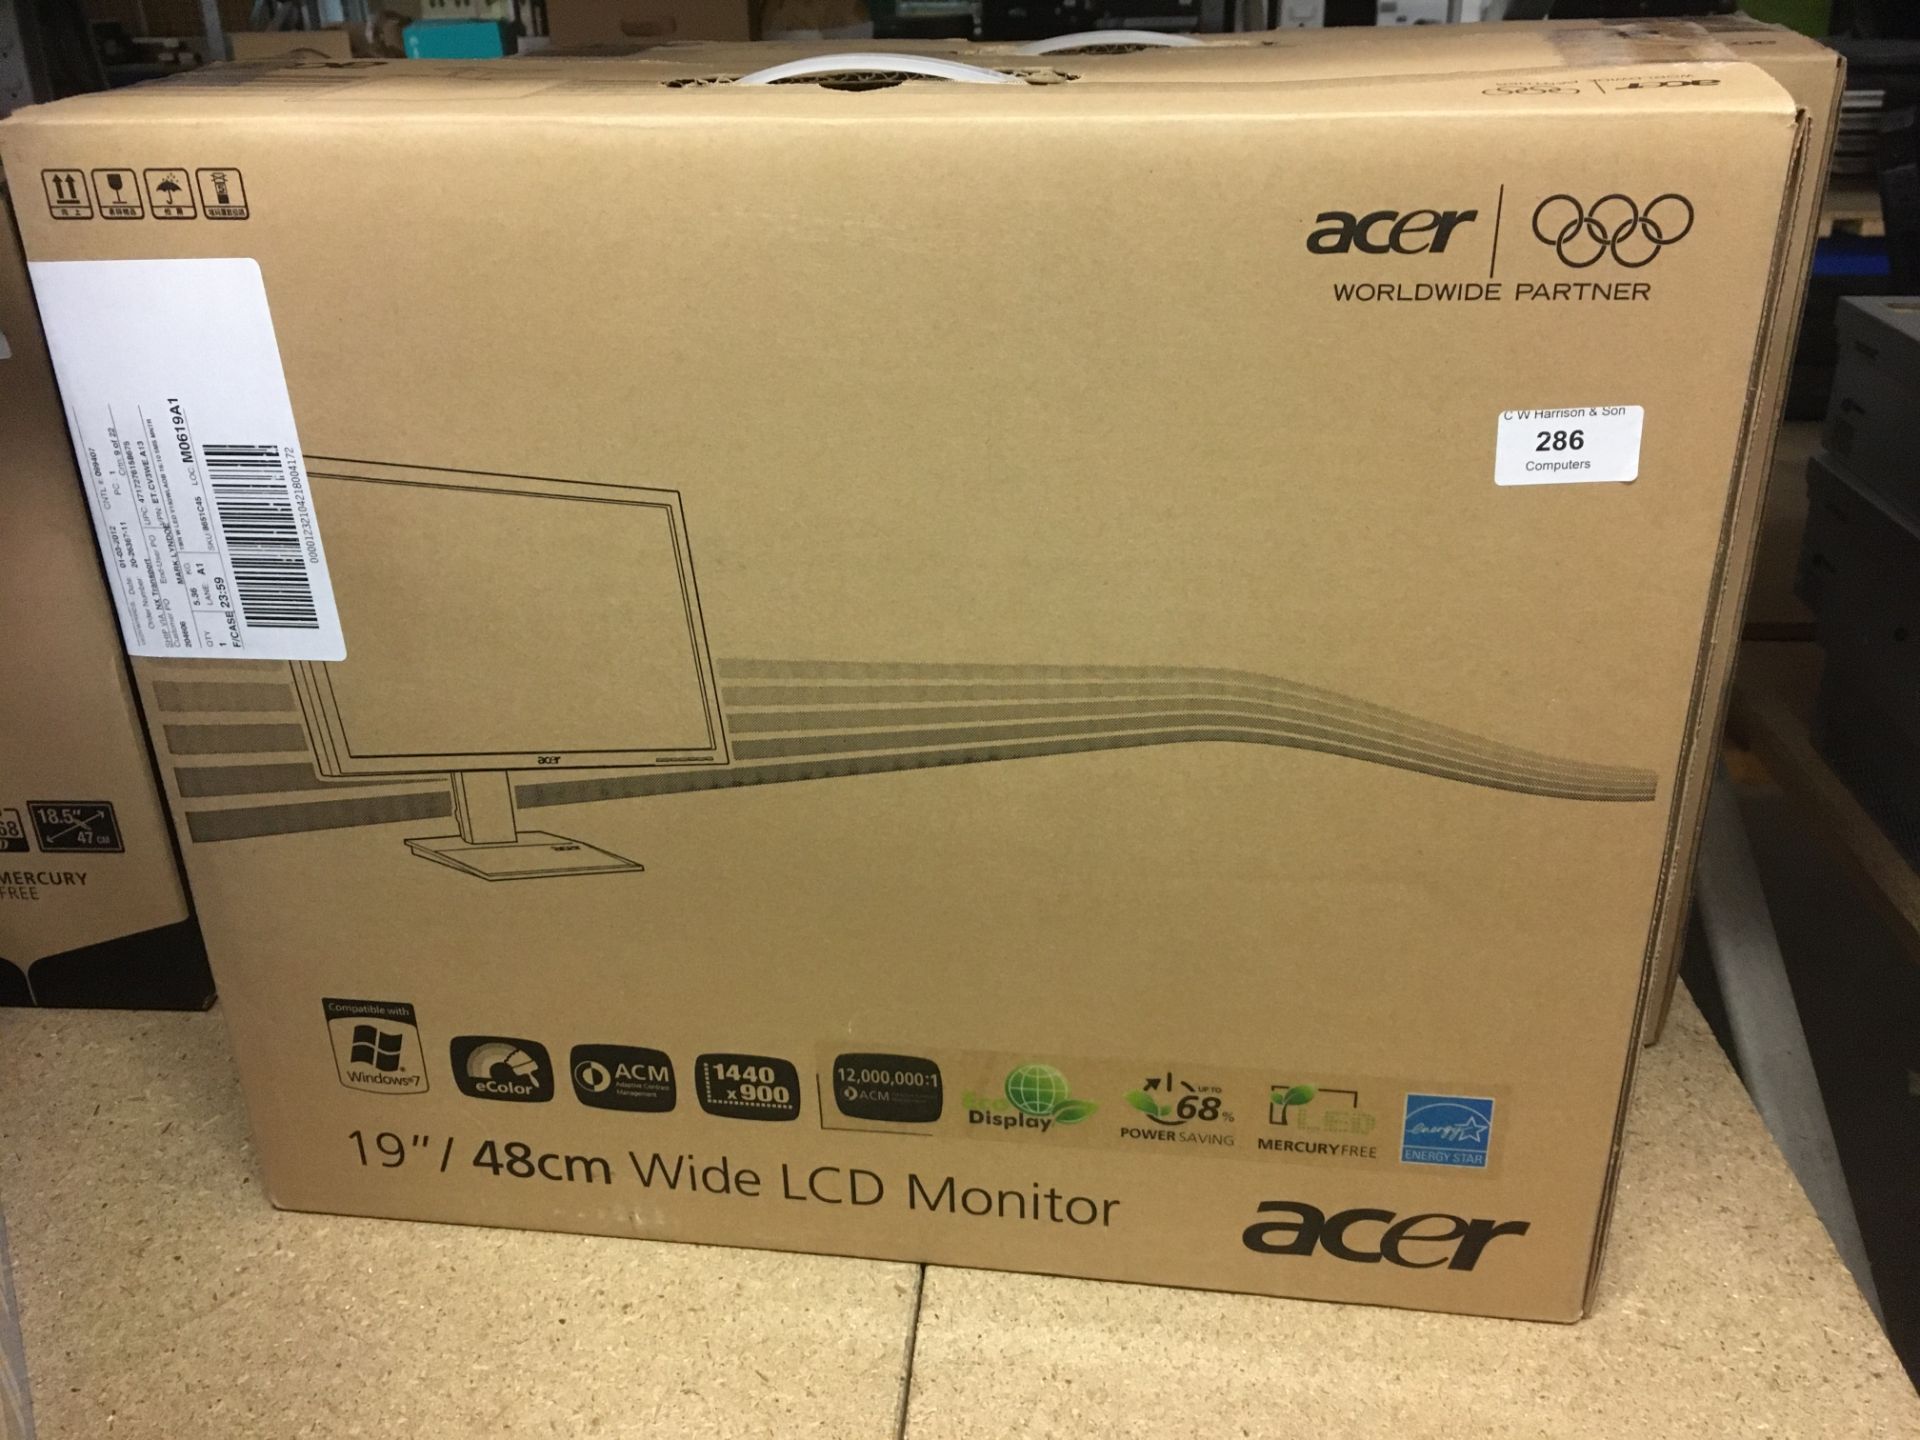 Acer 19" wide LCD monitor - boxed